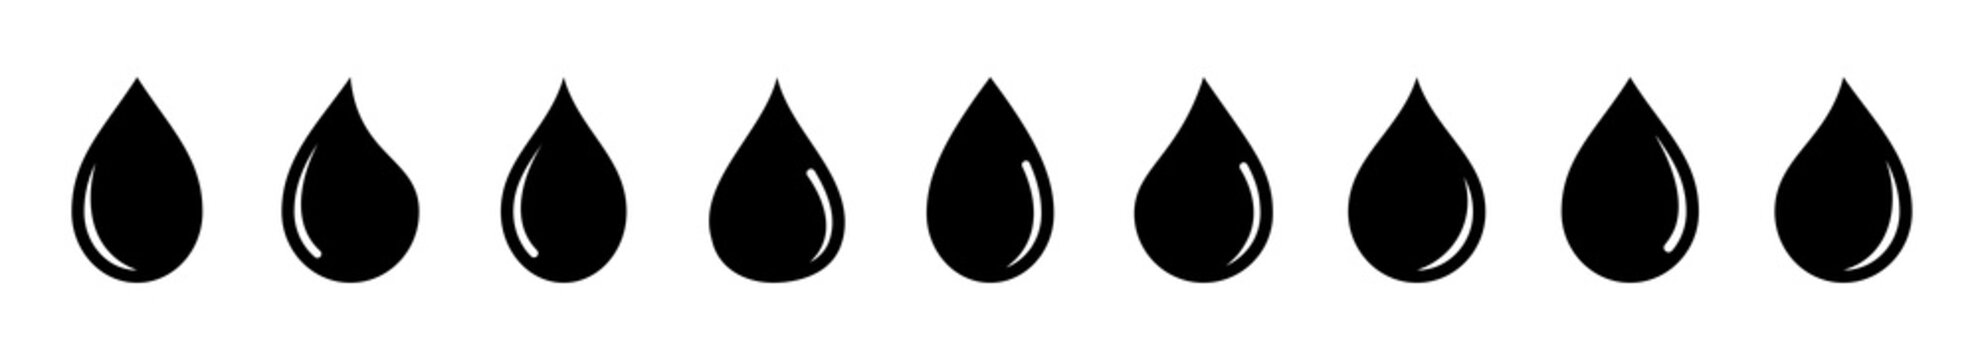 Collection of water droplets with different shapes. Water drop icon different shape. Water rain drops. Water drops collection set. Vector illustration